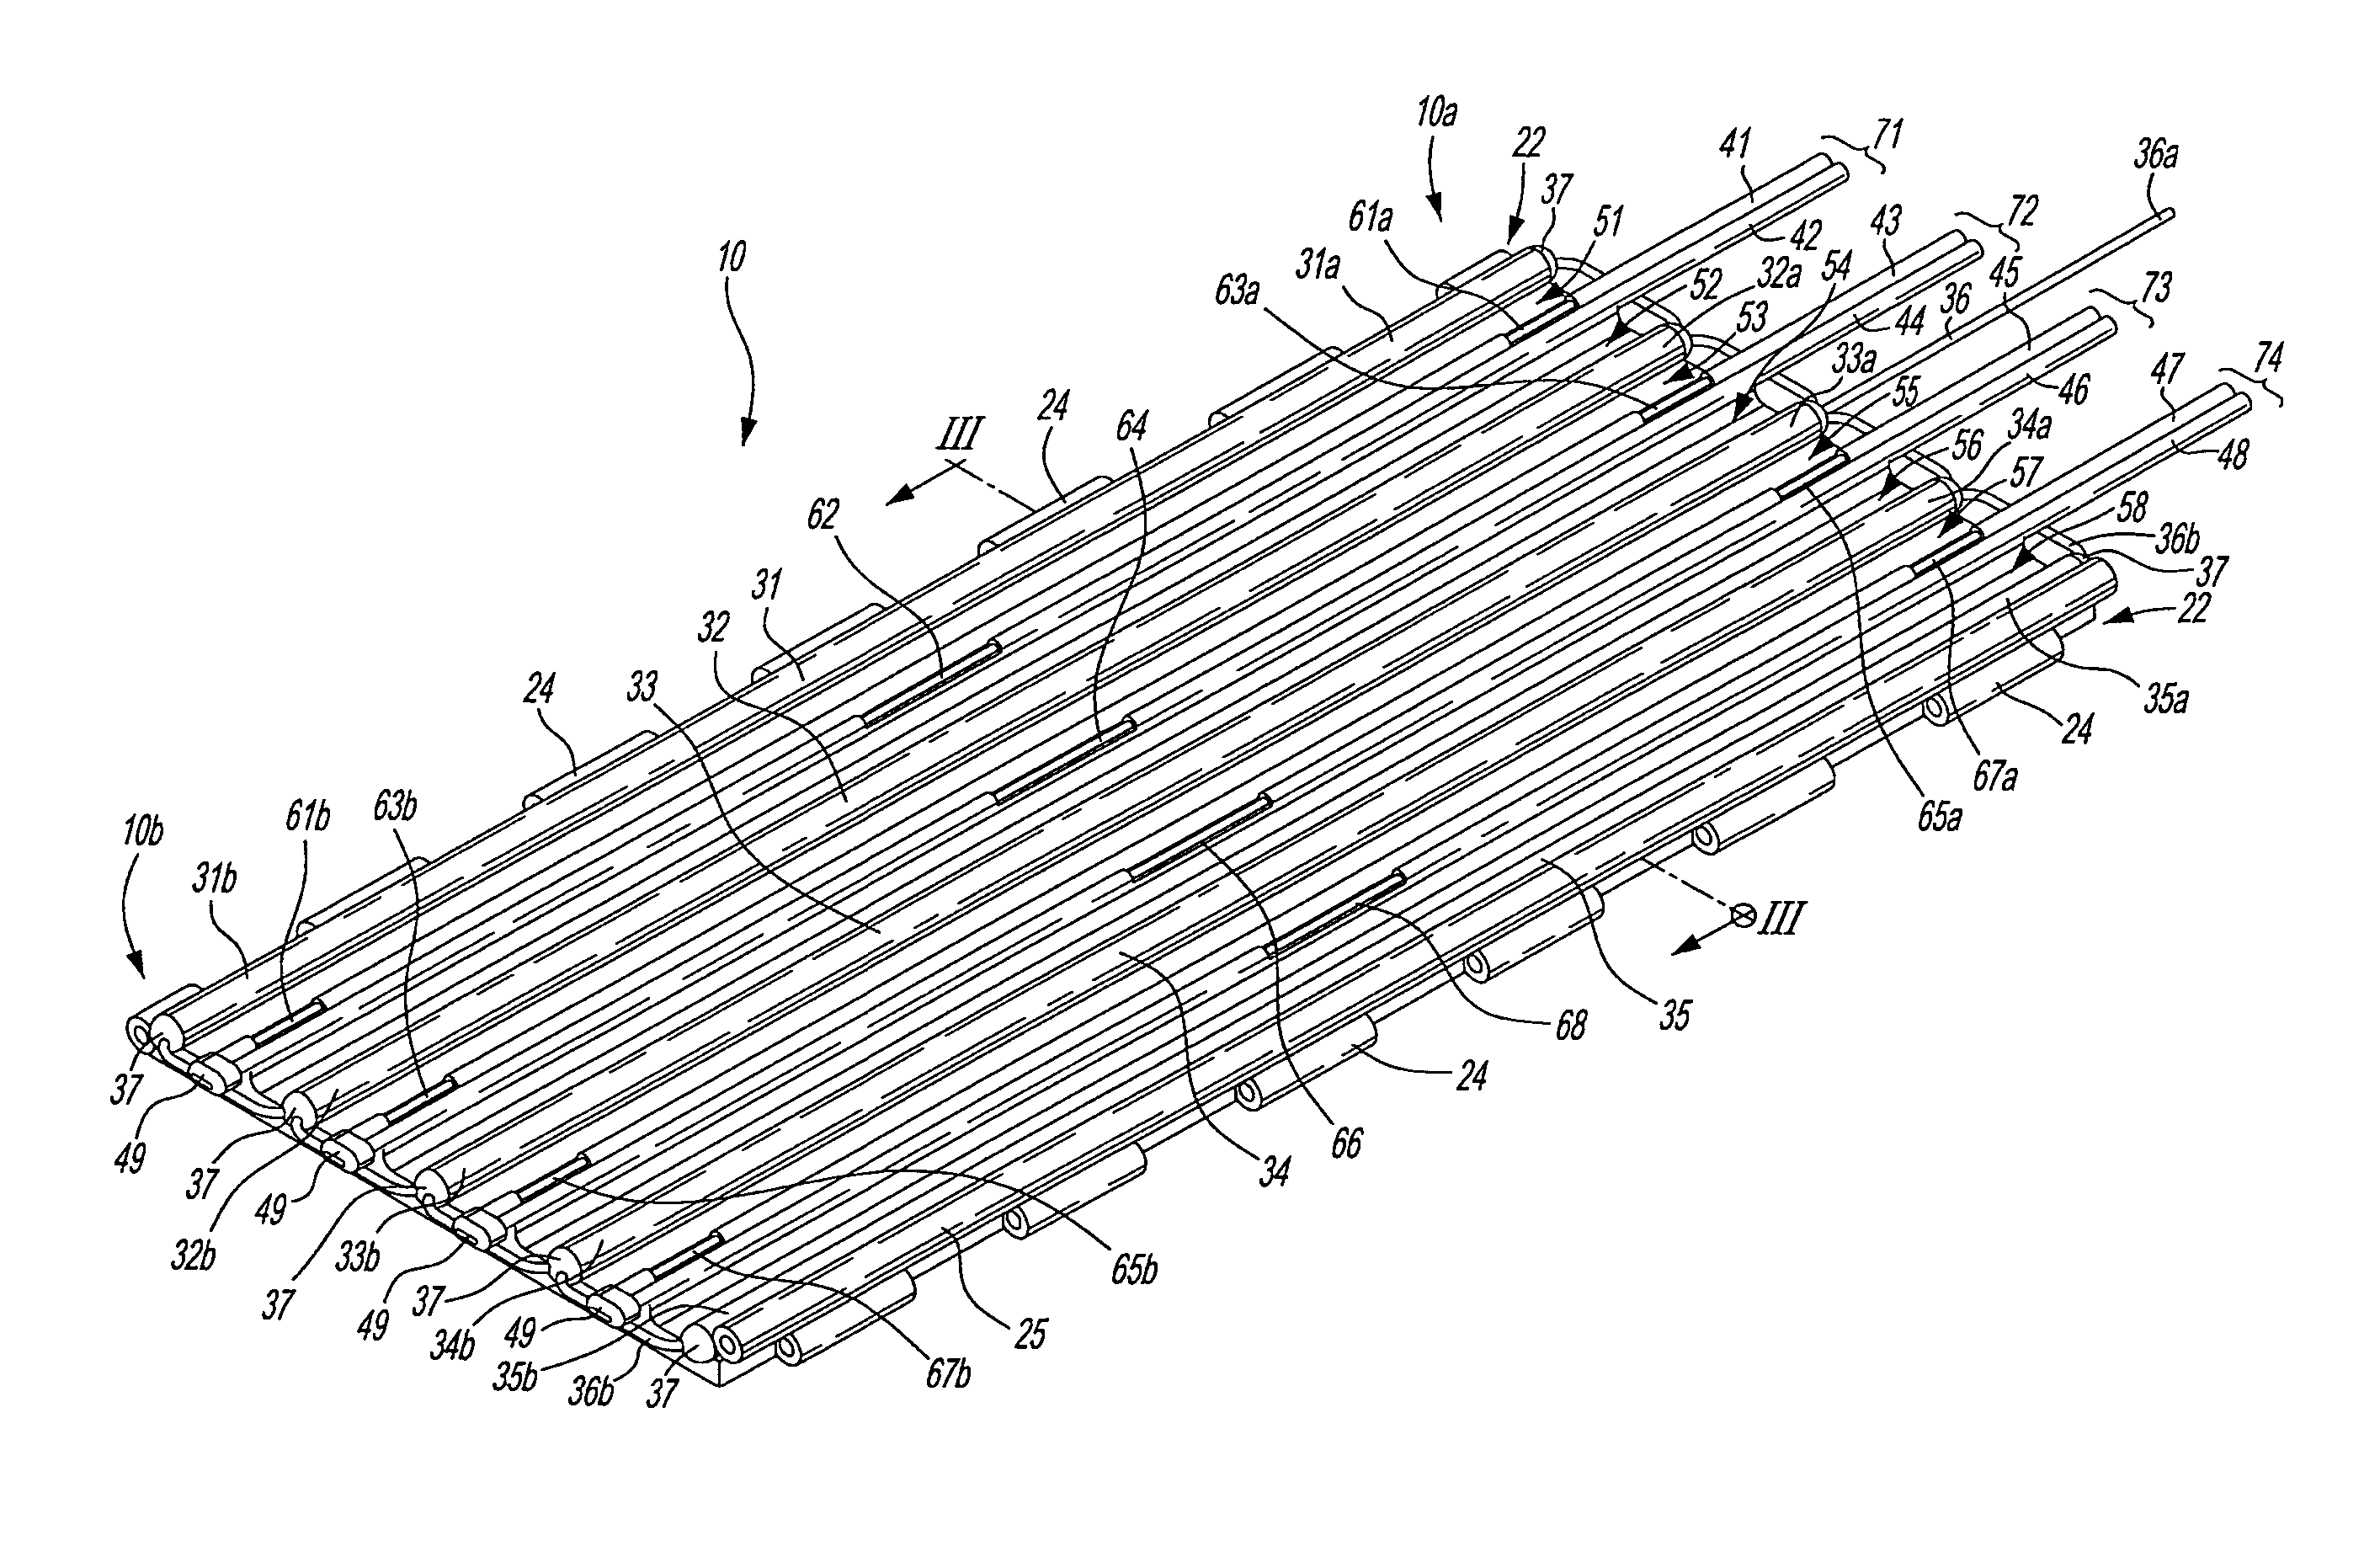 Nerve cuff, method and apparatus for manufacturing same